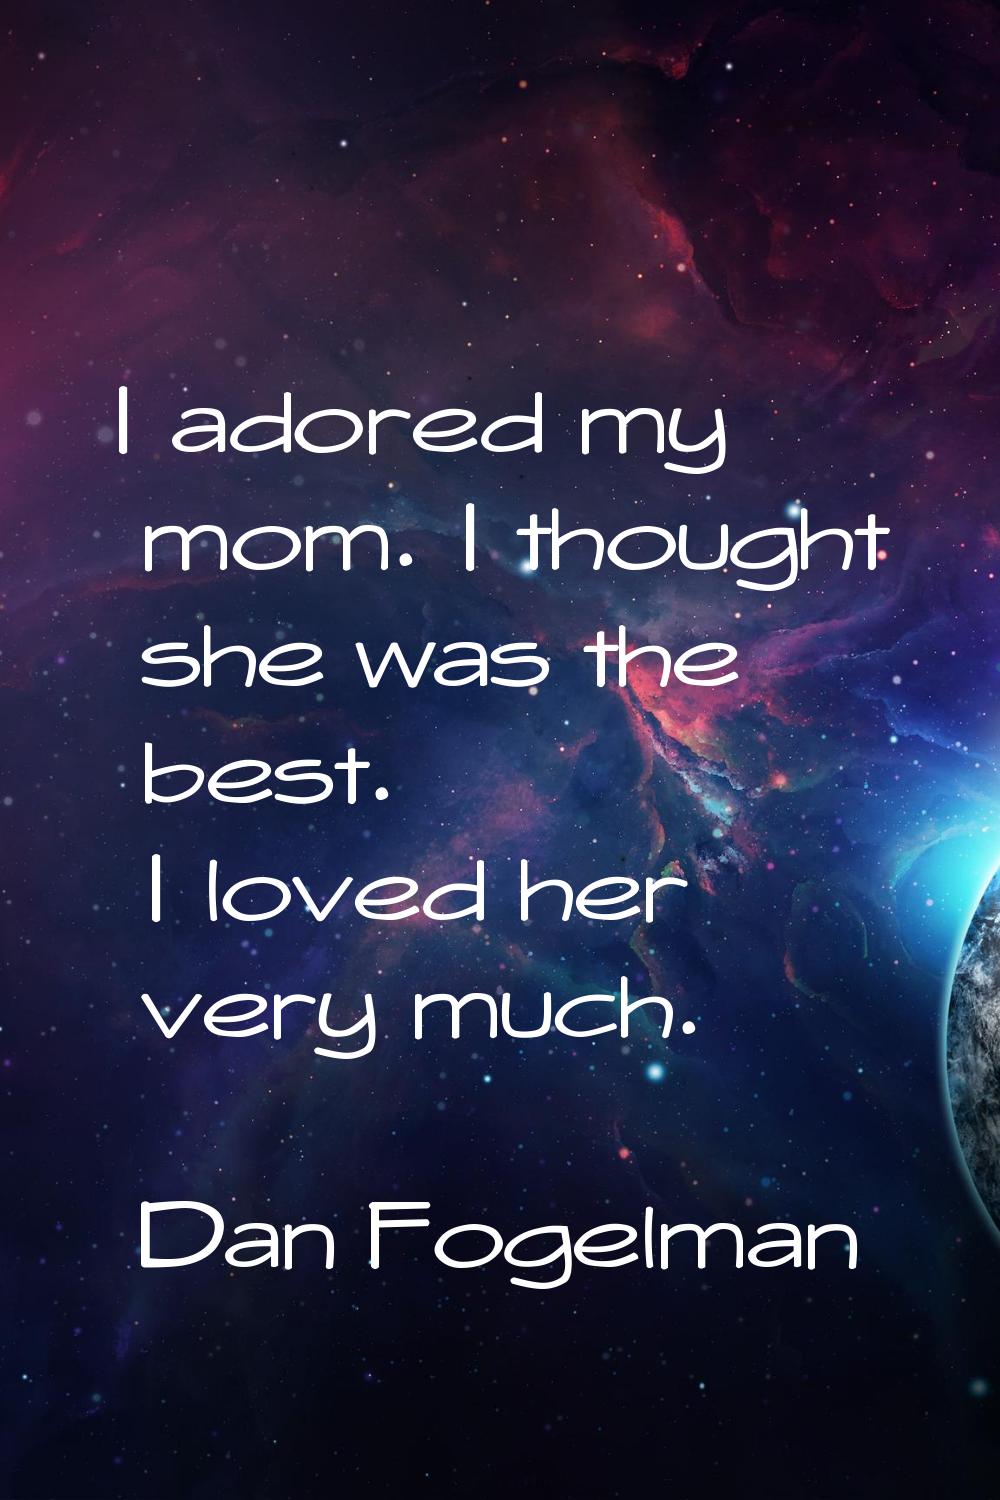 I adored my mom. I thought she was the best. I loved her very much.